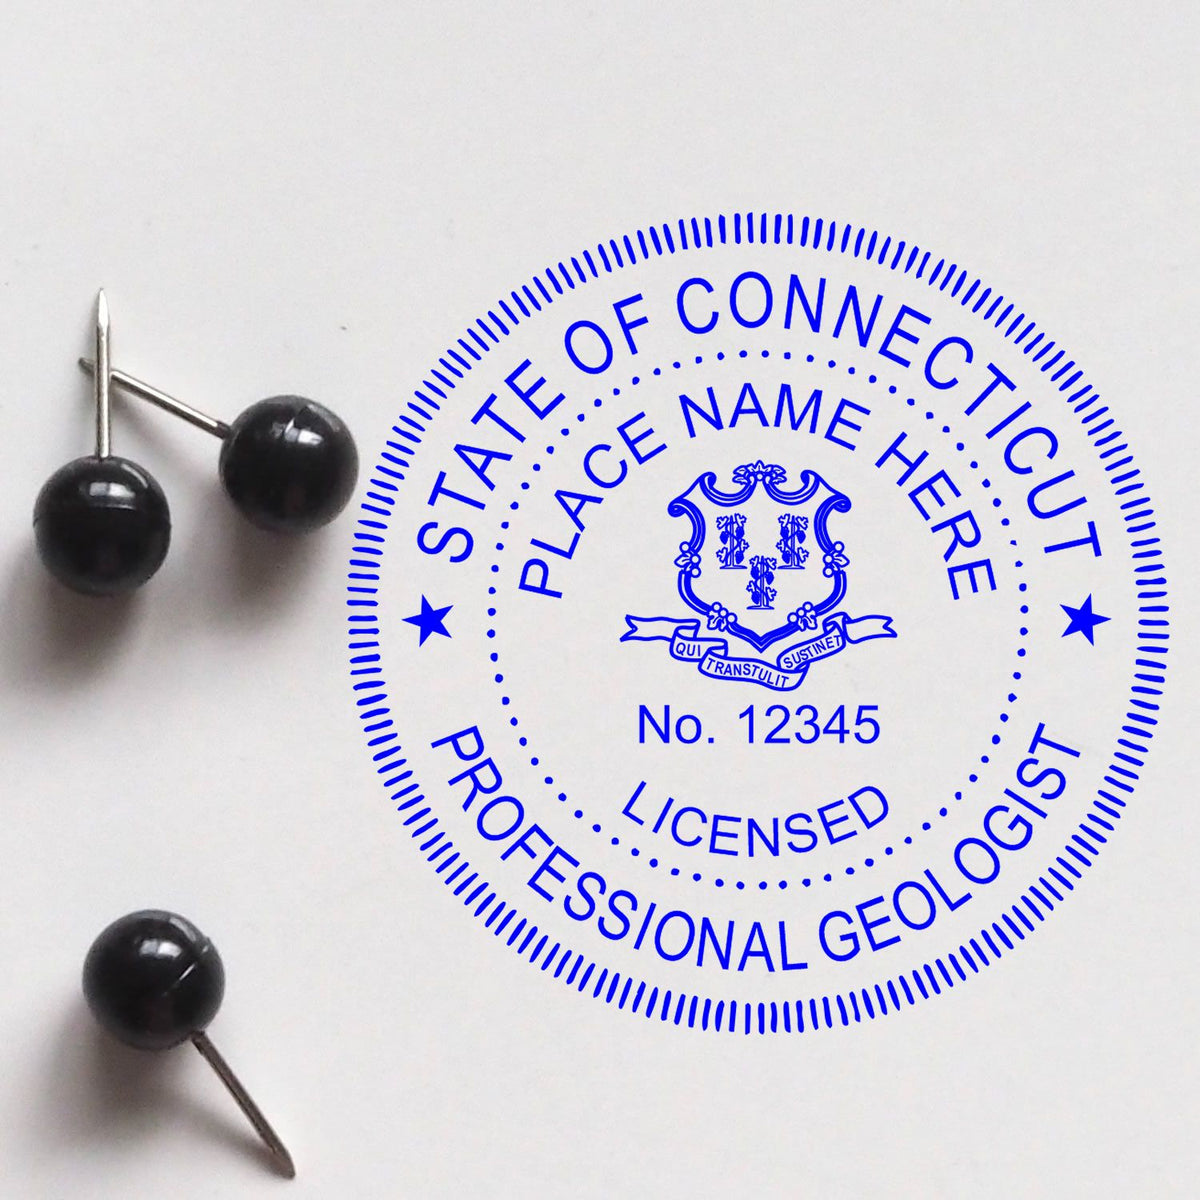 The Slim Pre-Inked Connecticut Professional Geologist Seal Stamp  impression comes to life with a crisp, detailed image stamped on paper - showcasing true professional quality.